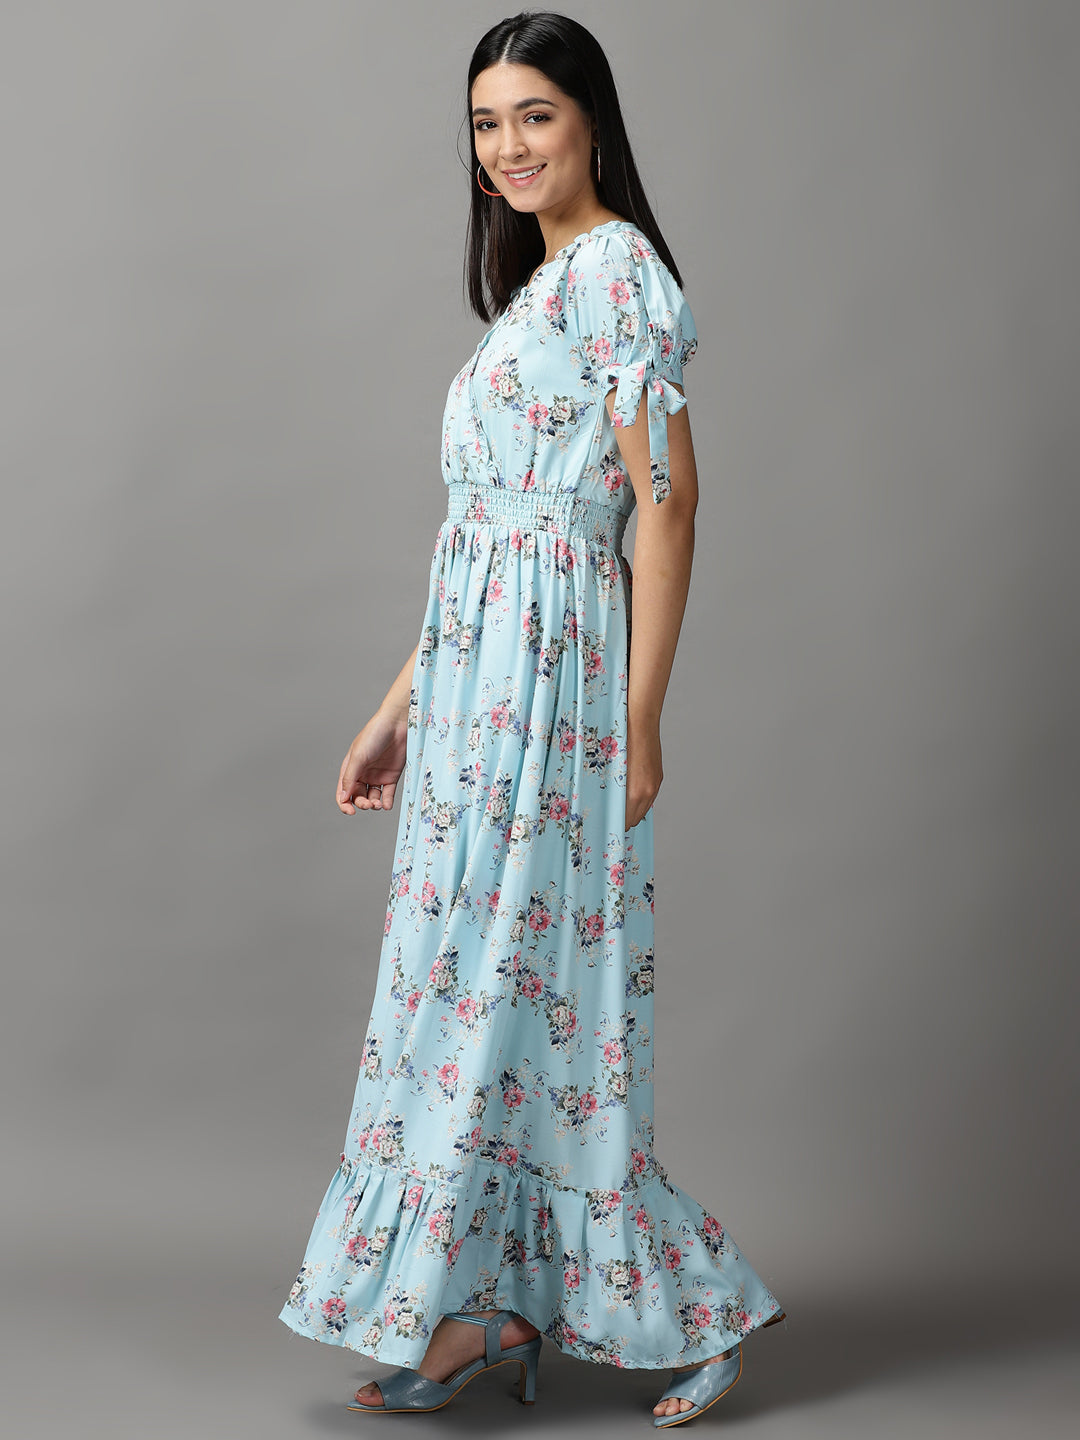 Women's Blue Floral Fit and Flare Dress